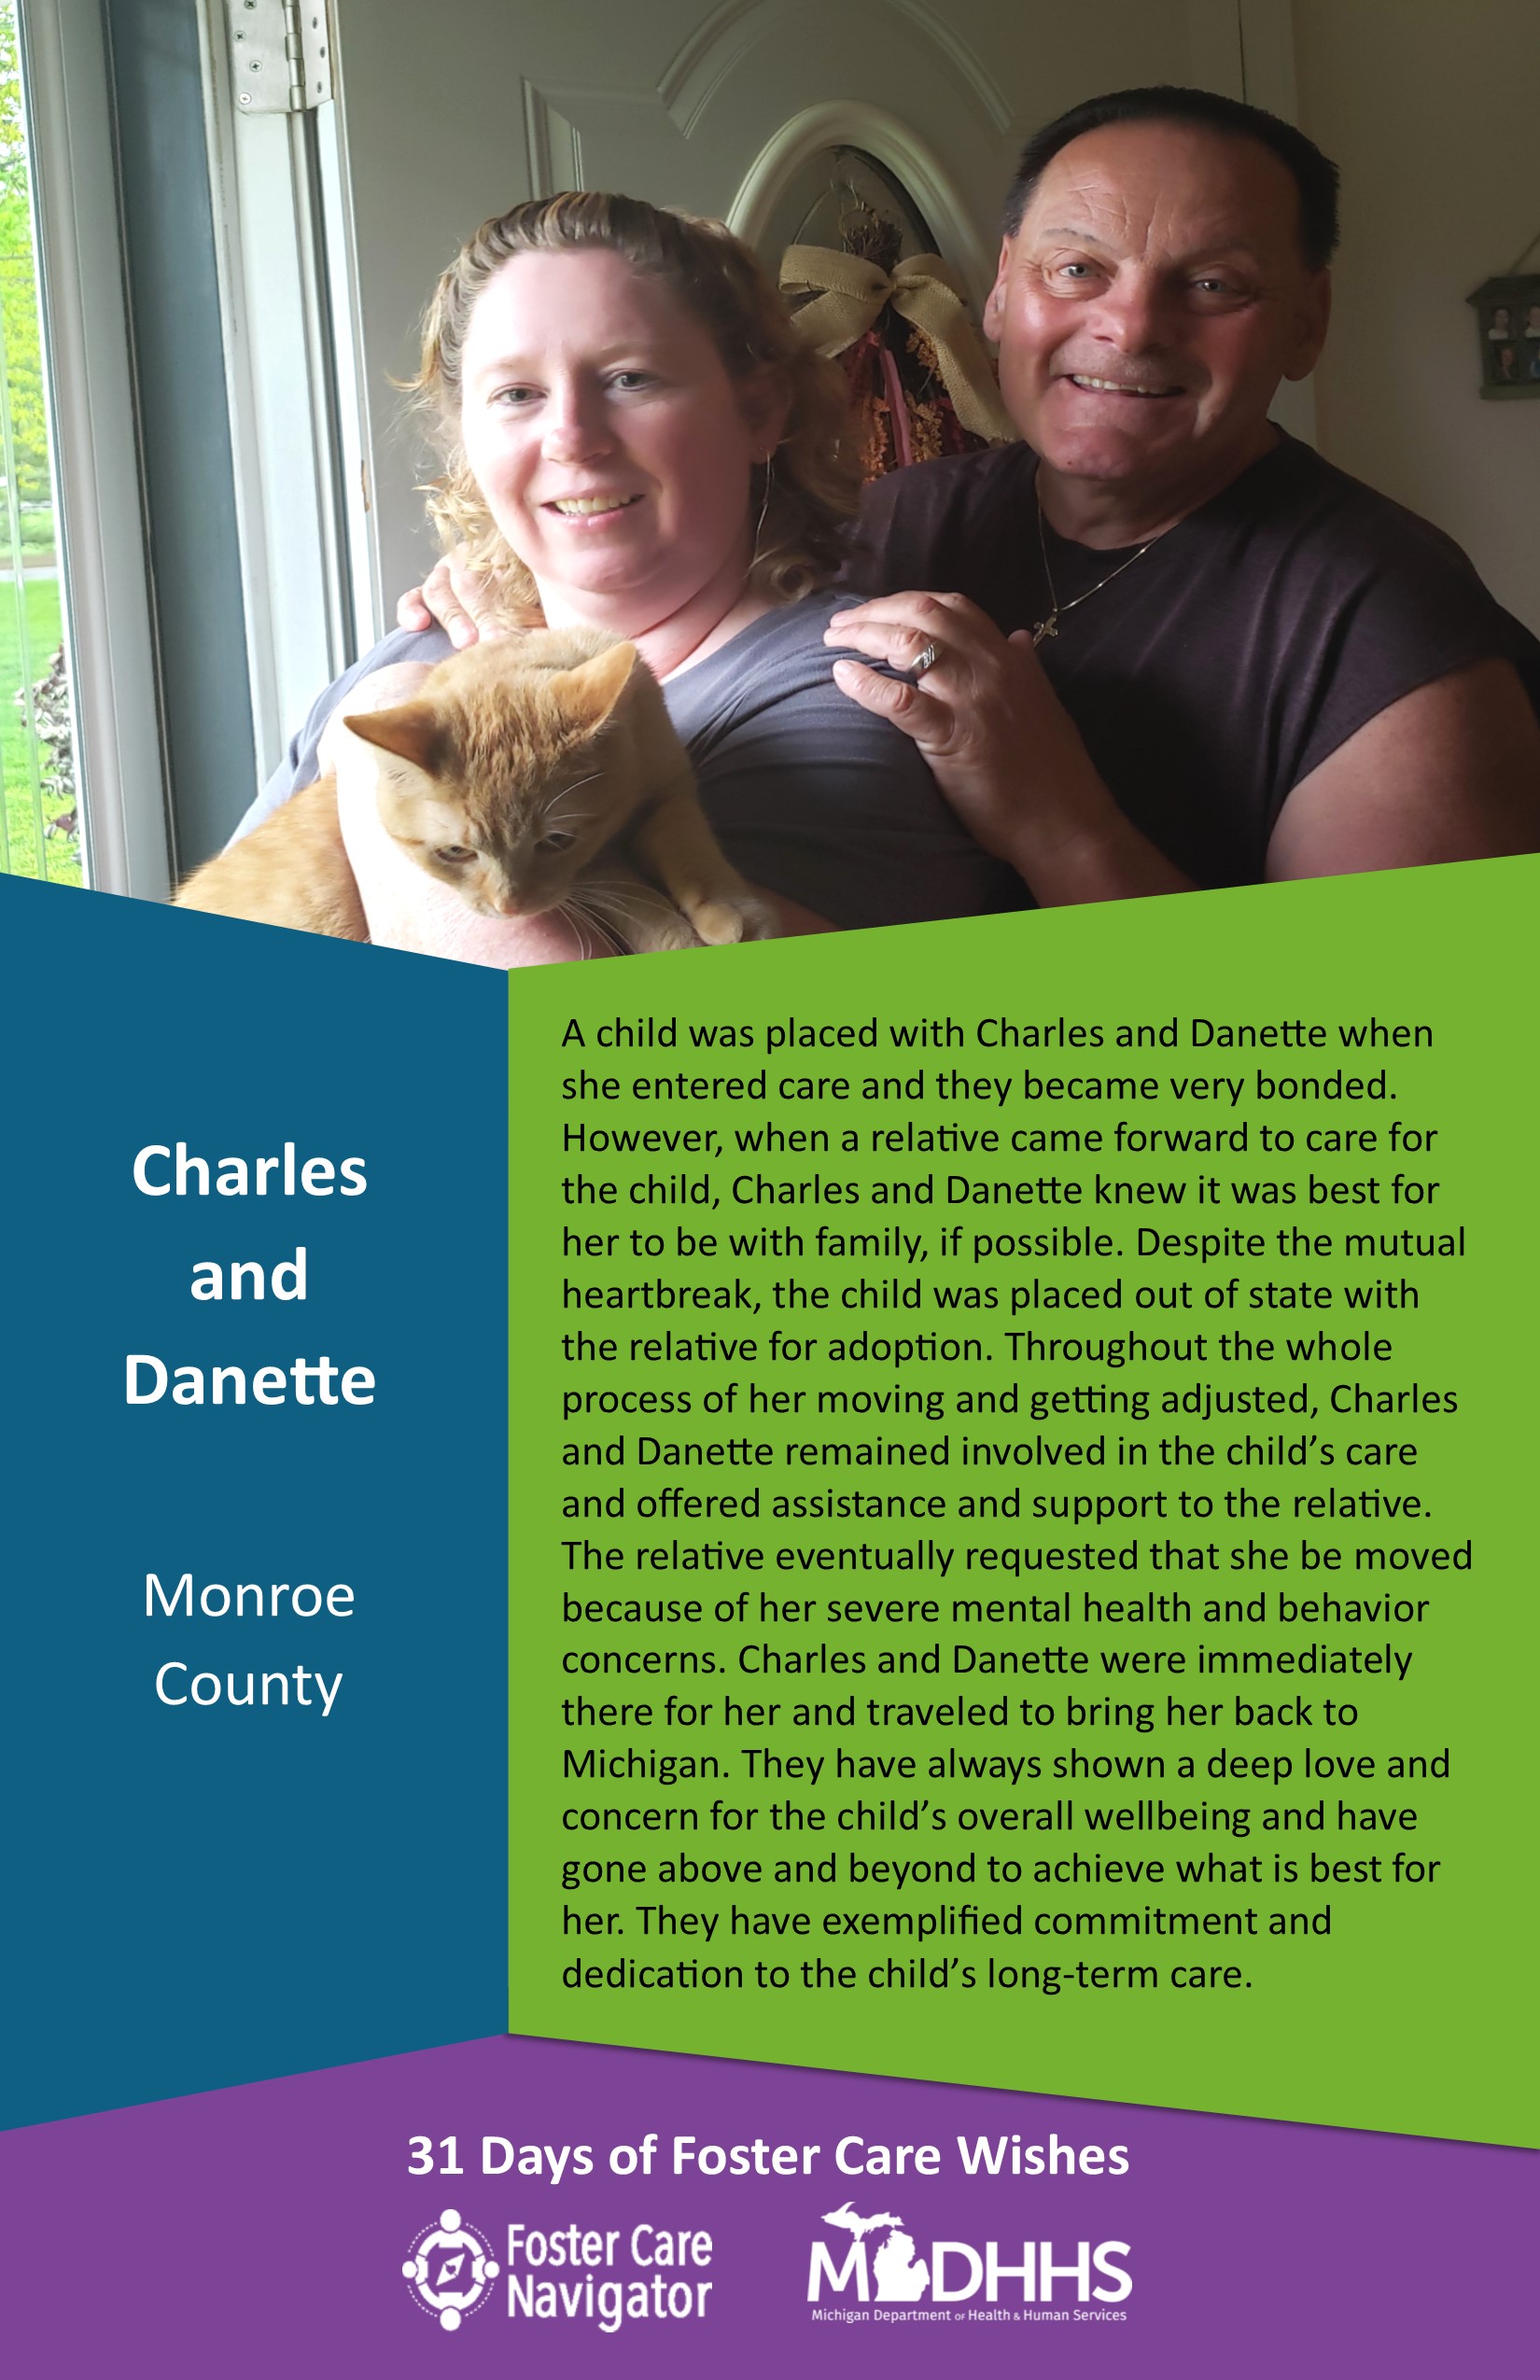 This full page feature includes all of the text listed in the body of this blog post as well as a photo of Charles and Danette. The background is blue on the left, green on the right, and purple at the bottom of the page where the logos are located.